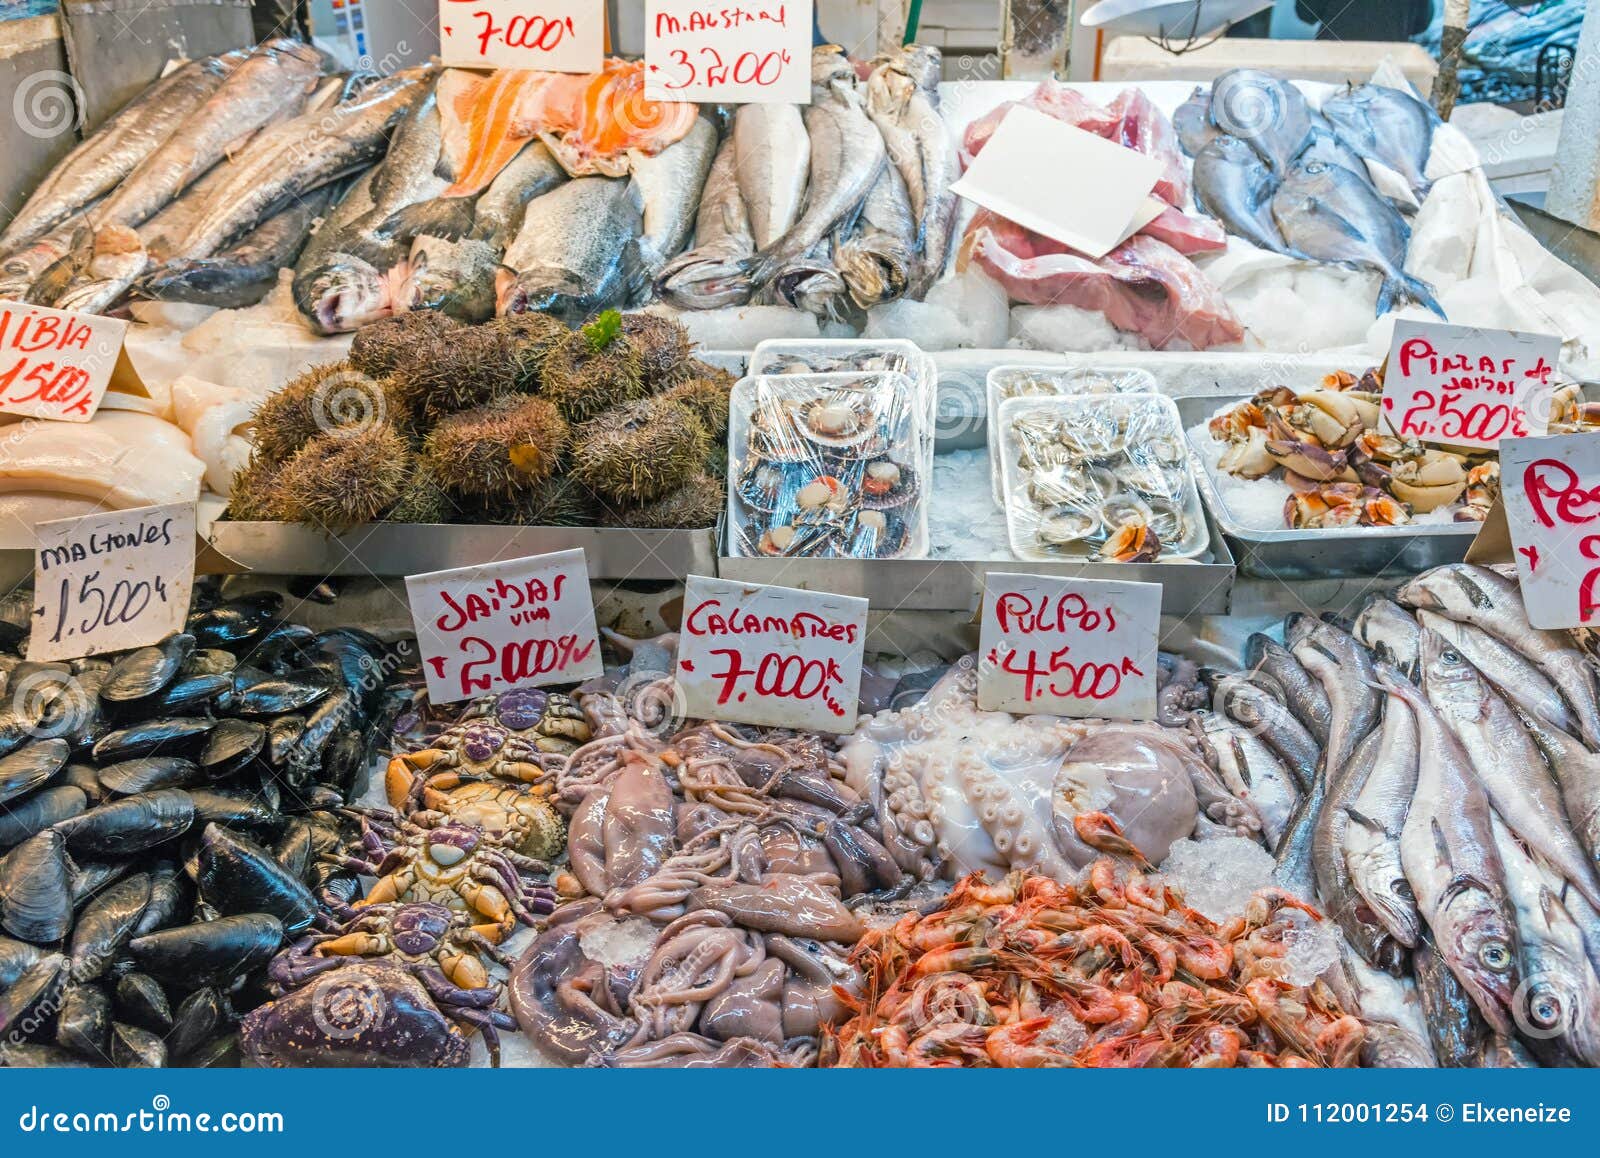 Fresh Seafood And Fish For Sale At A Market Stock Photo ...